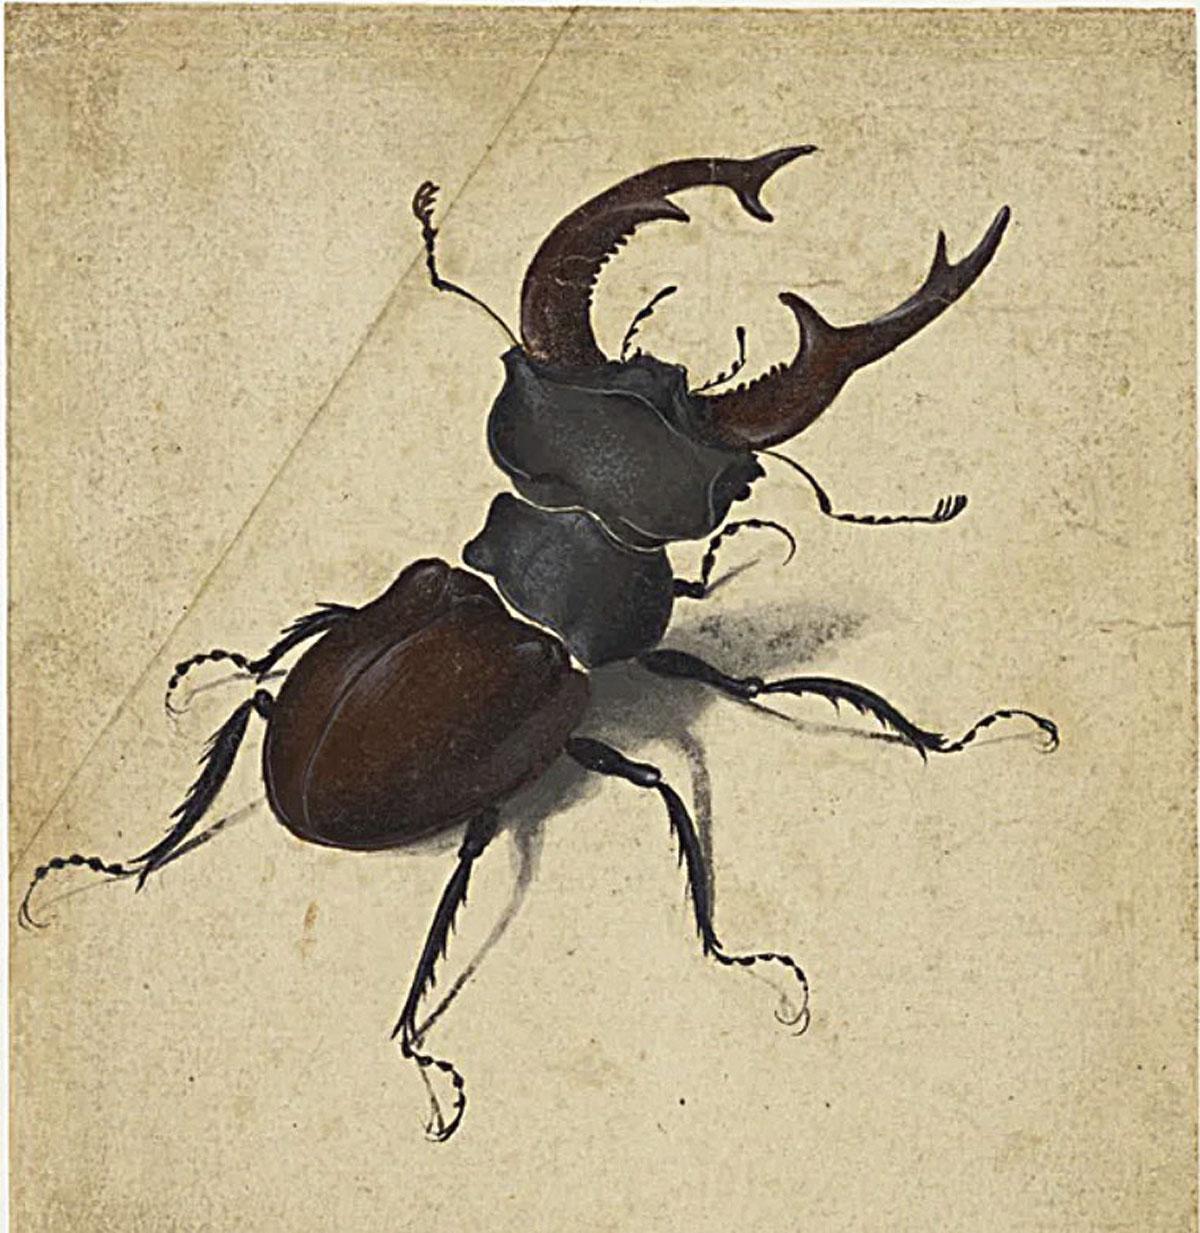 Albrecht Dürer also made detailed drawings of the smallest creatures, such as the stag beetle (1505).